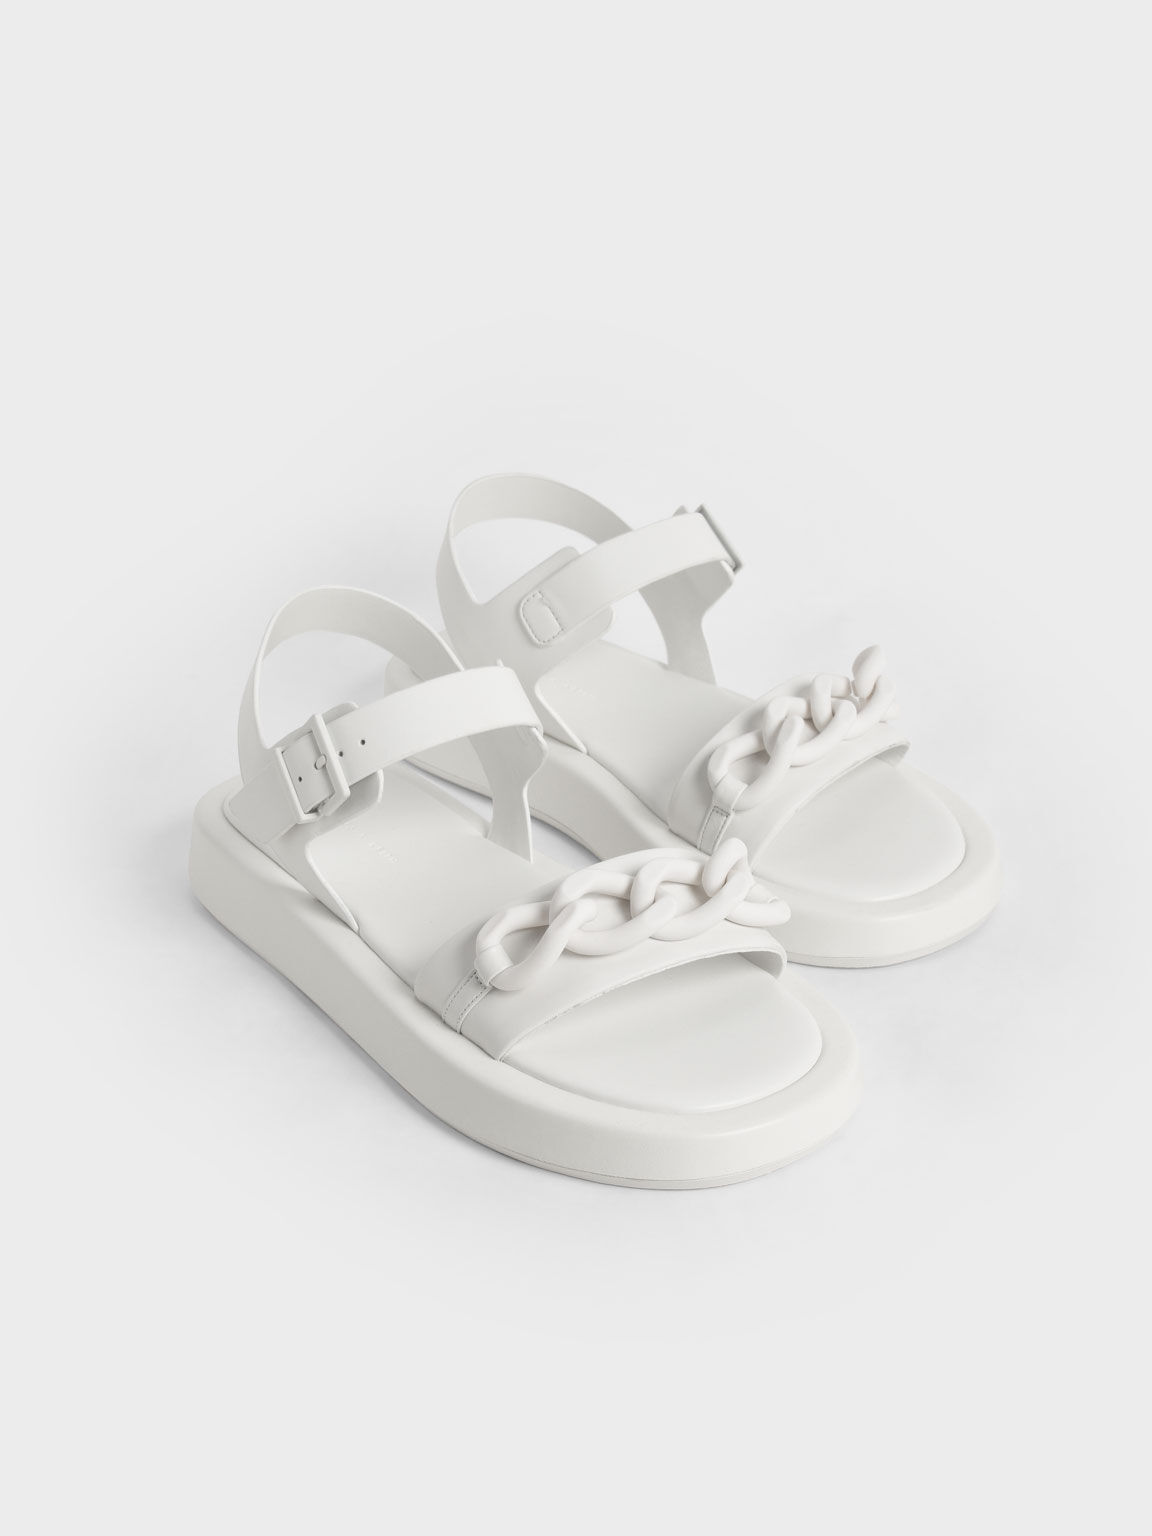 Chunky Chain-Link Ankle-Strap Padded Sandals, White, hi-res